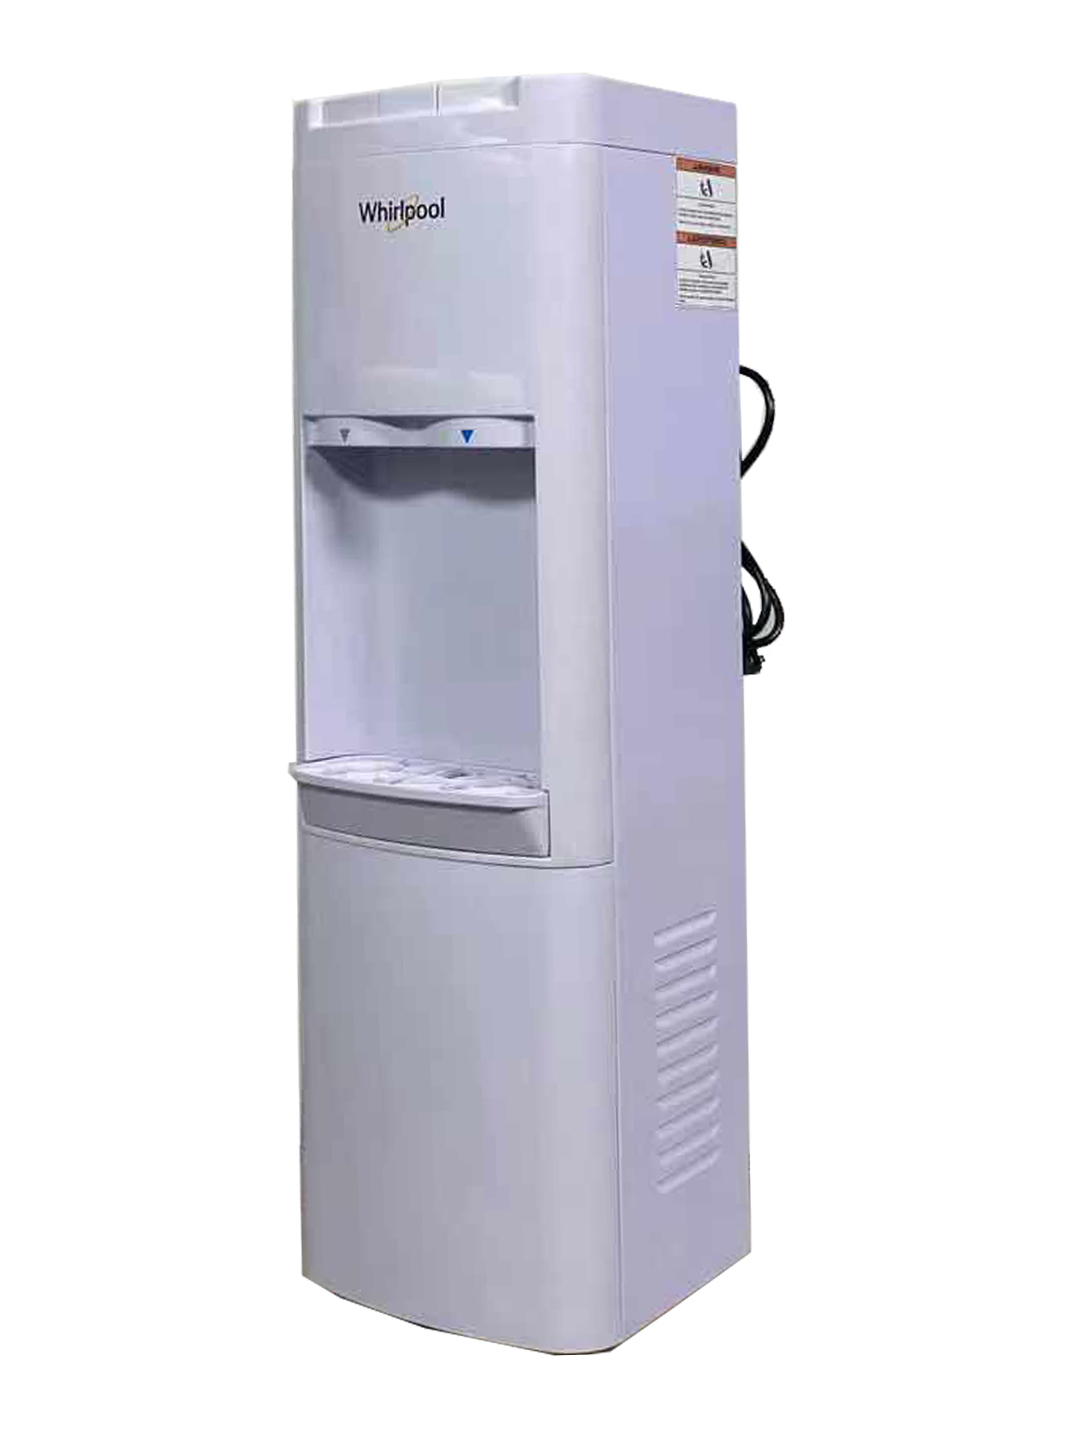 Whirlpool Commercial Water Dispenser Water Cooler with Ice Chilled Water Cooling Technology, White - image 4 of 10